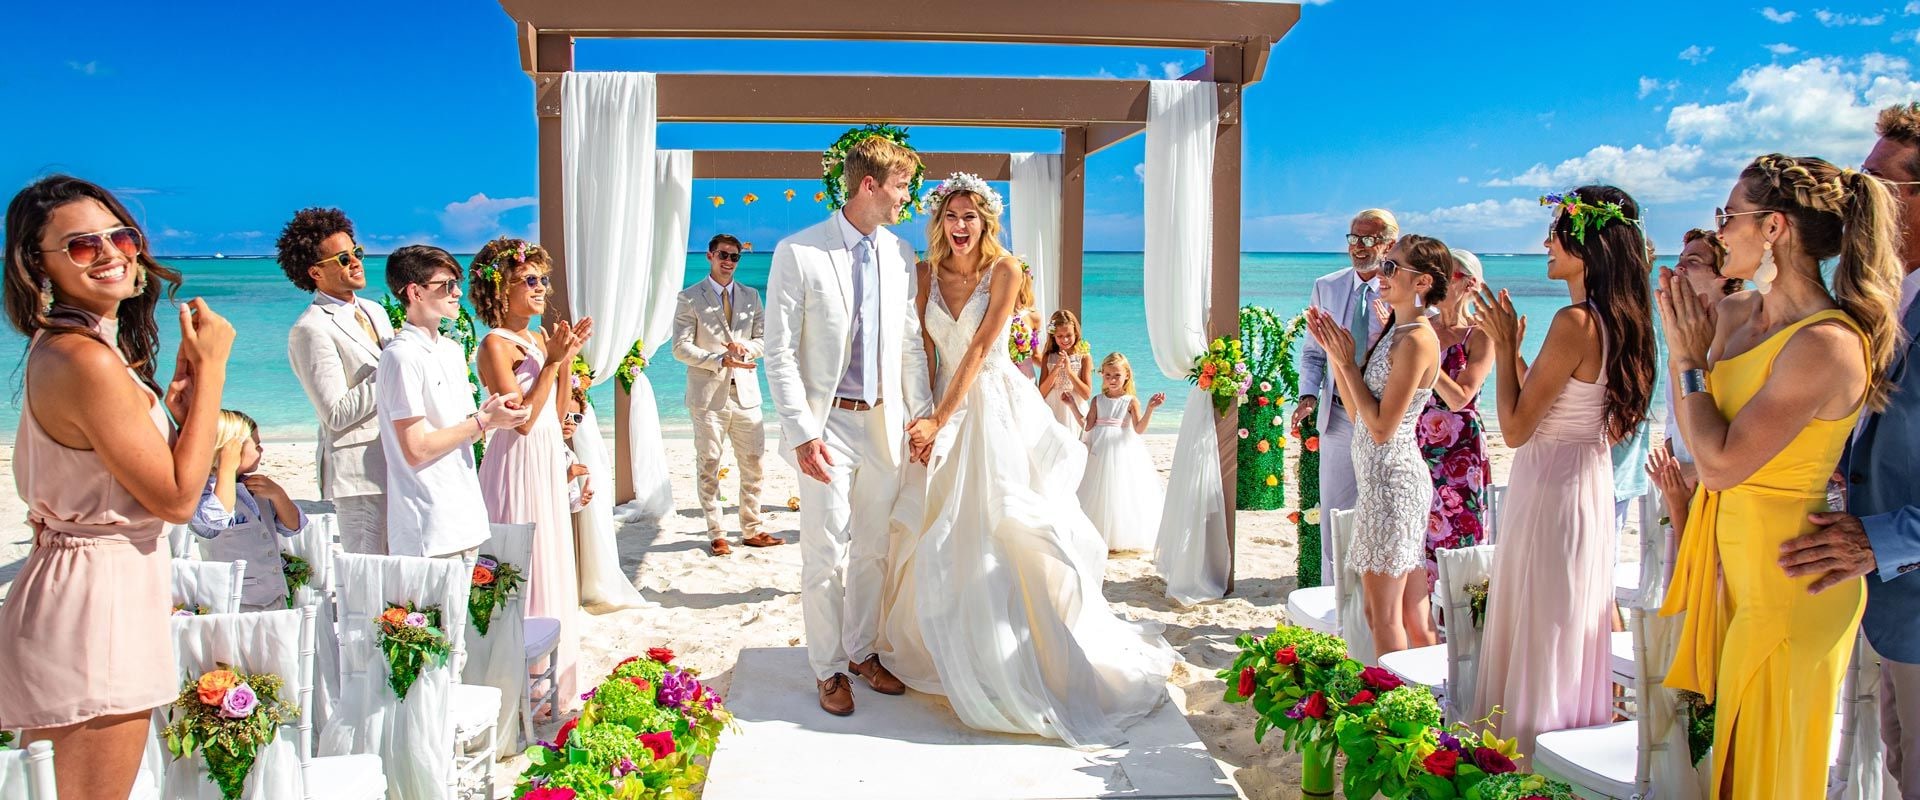 Exploring the Beauty of a Tropical Island for Your Destination Wedding